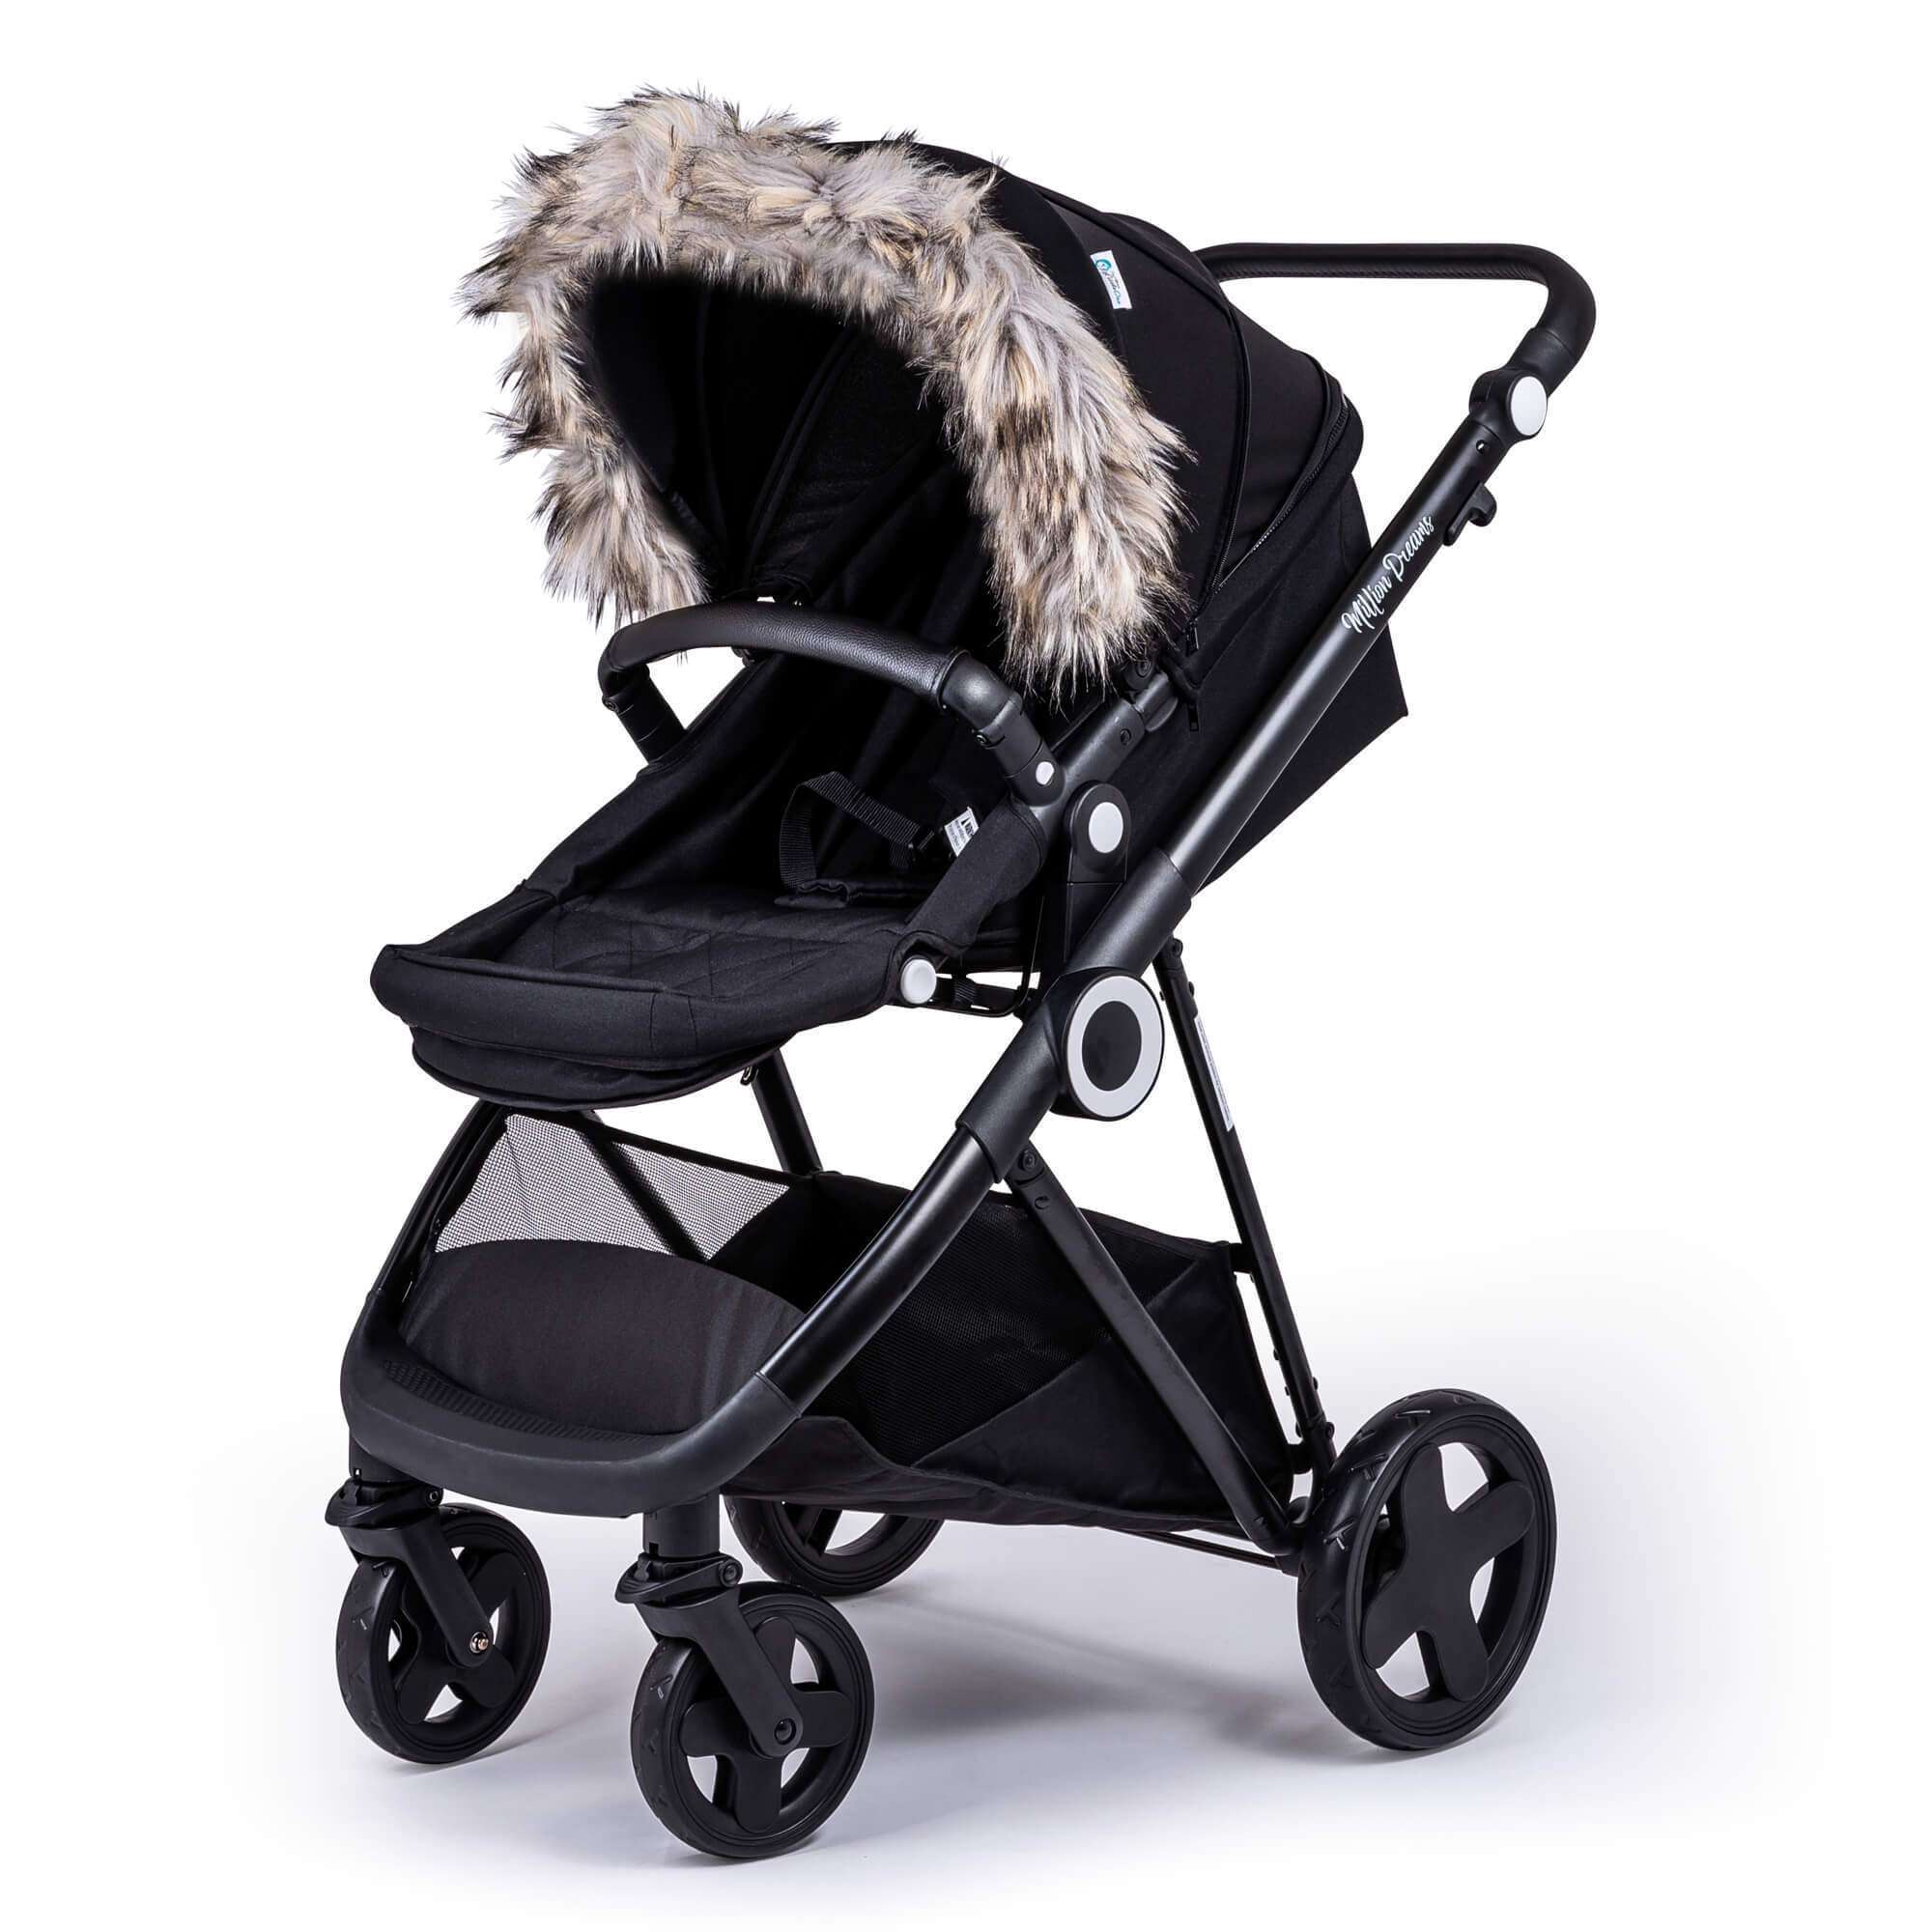 Pram Fur Hood Trim Attachment for Pushchair Compatible with Valco - Light Grey / Fits All Models | For Your Little One